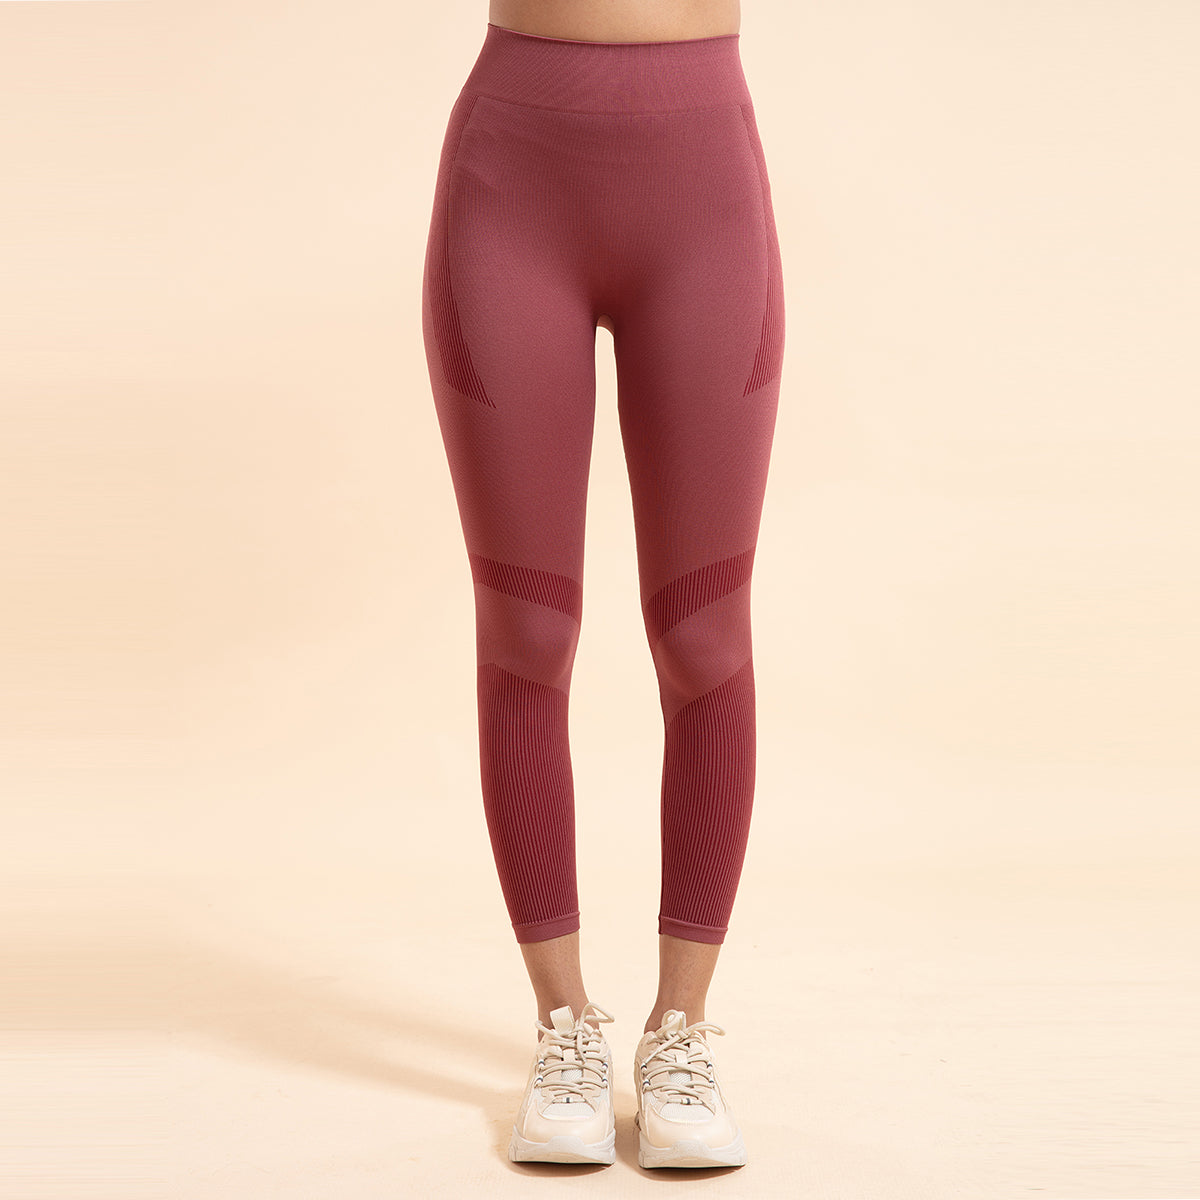 Nykd All Day Seamless Leggings- NYK097 Roan Rogue